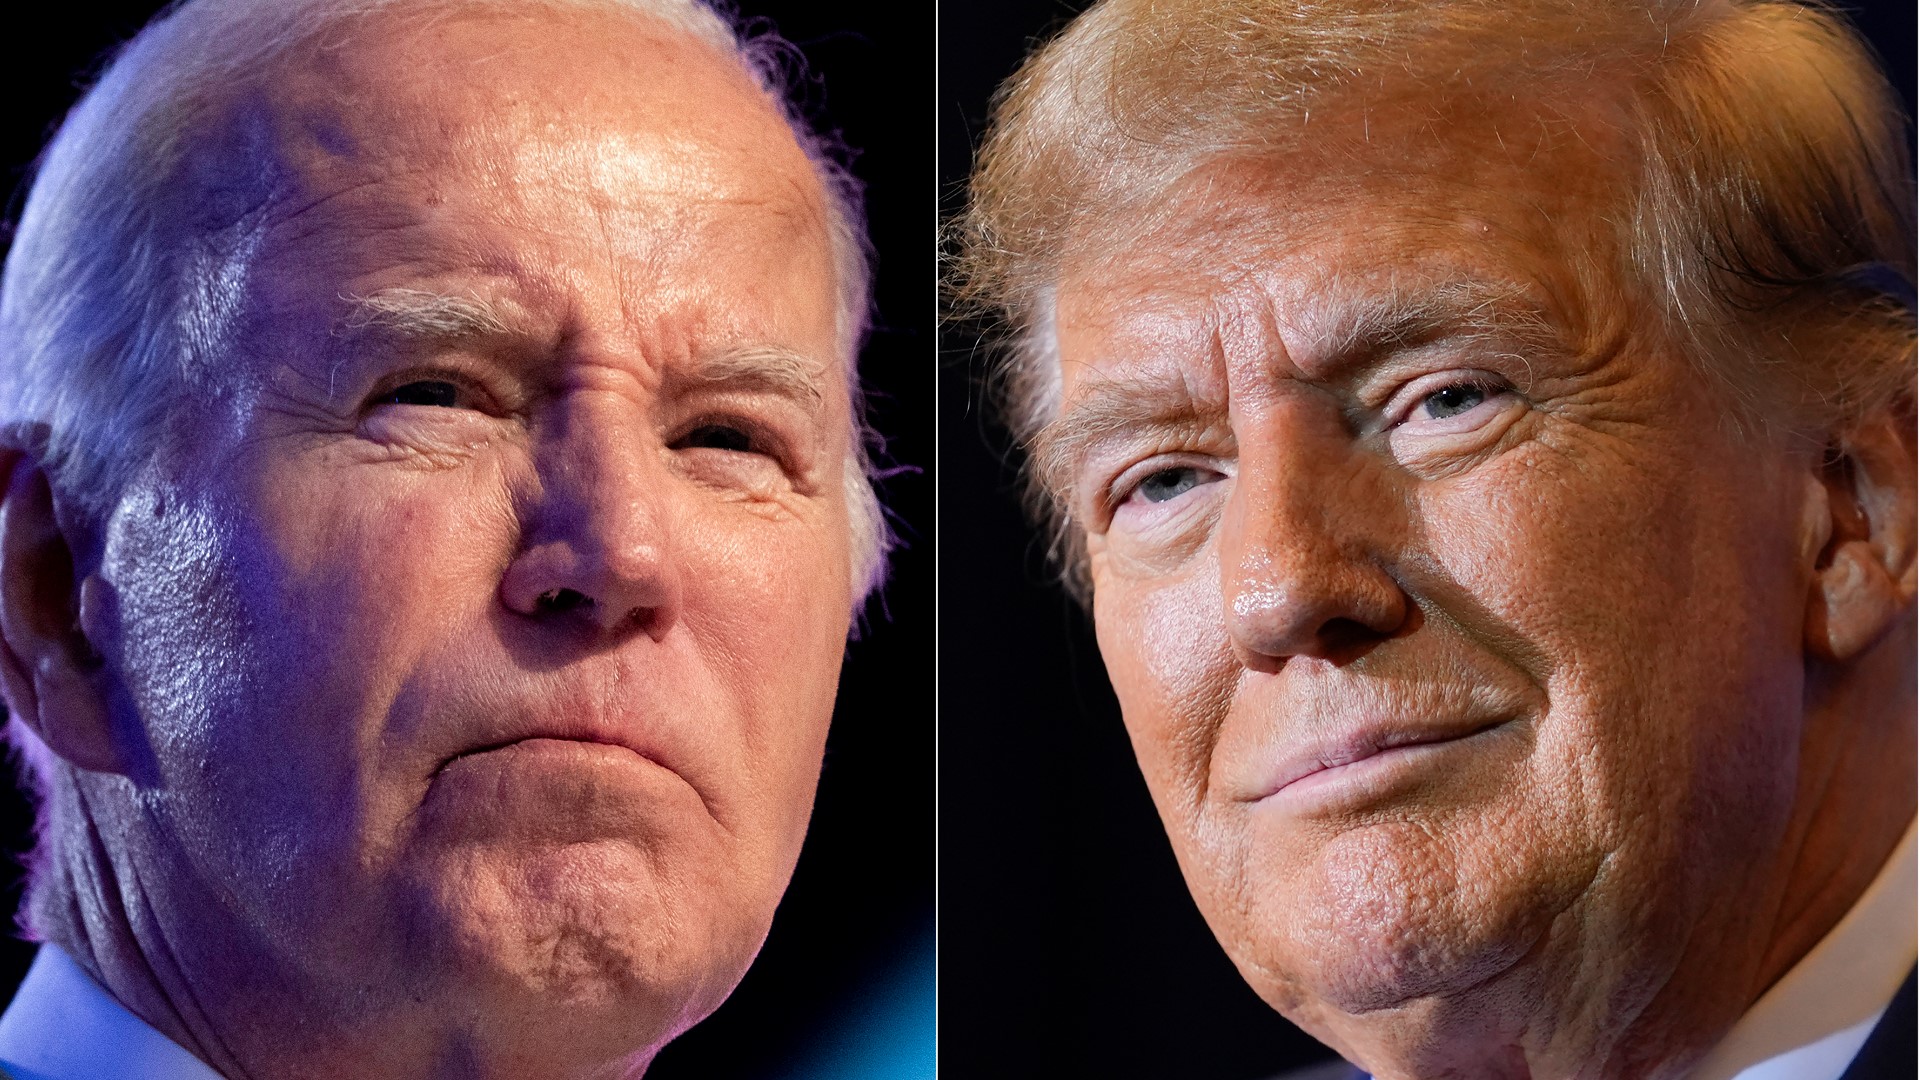 President Joe Biden became the presumptive nominee before Washington ballots were counted. Former President Donald Trump won the primary in Washington state.